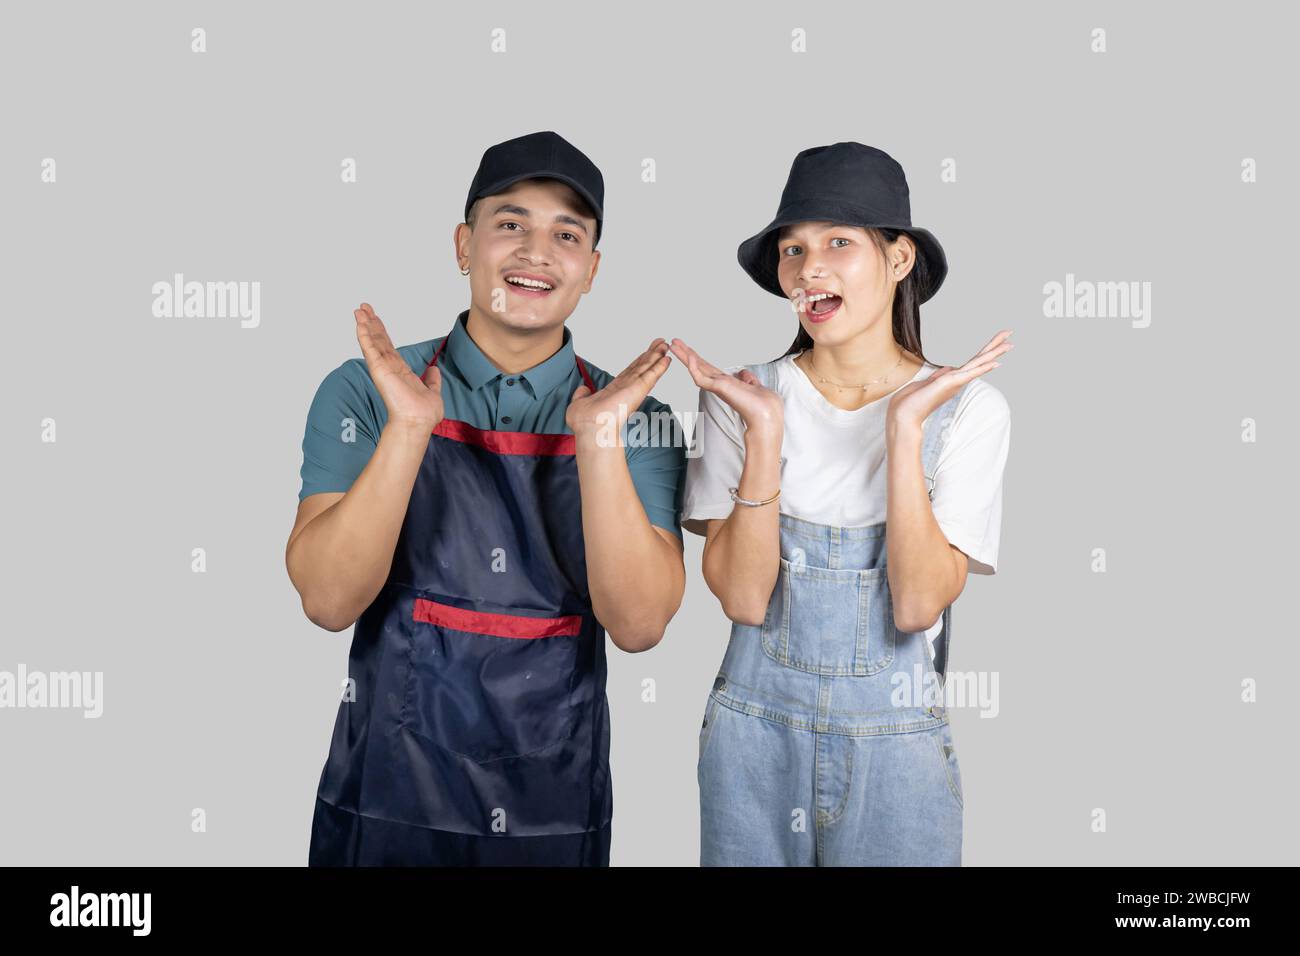 Asian Agriculture Nepali Indian Farming Couple Giving Gestures and Expressions Stock Photo